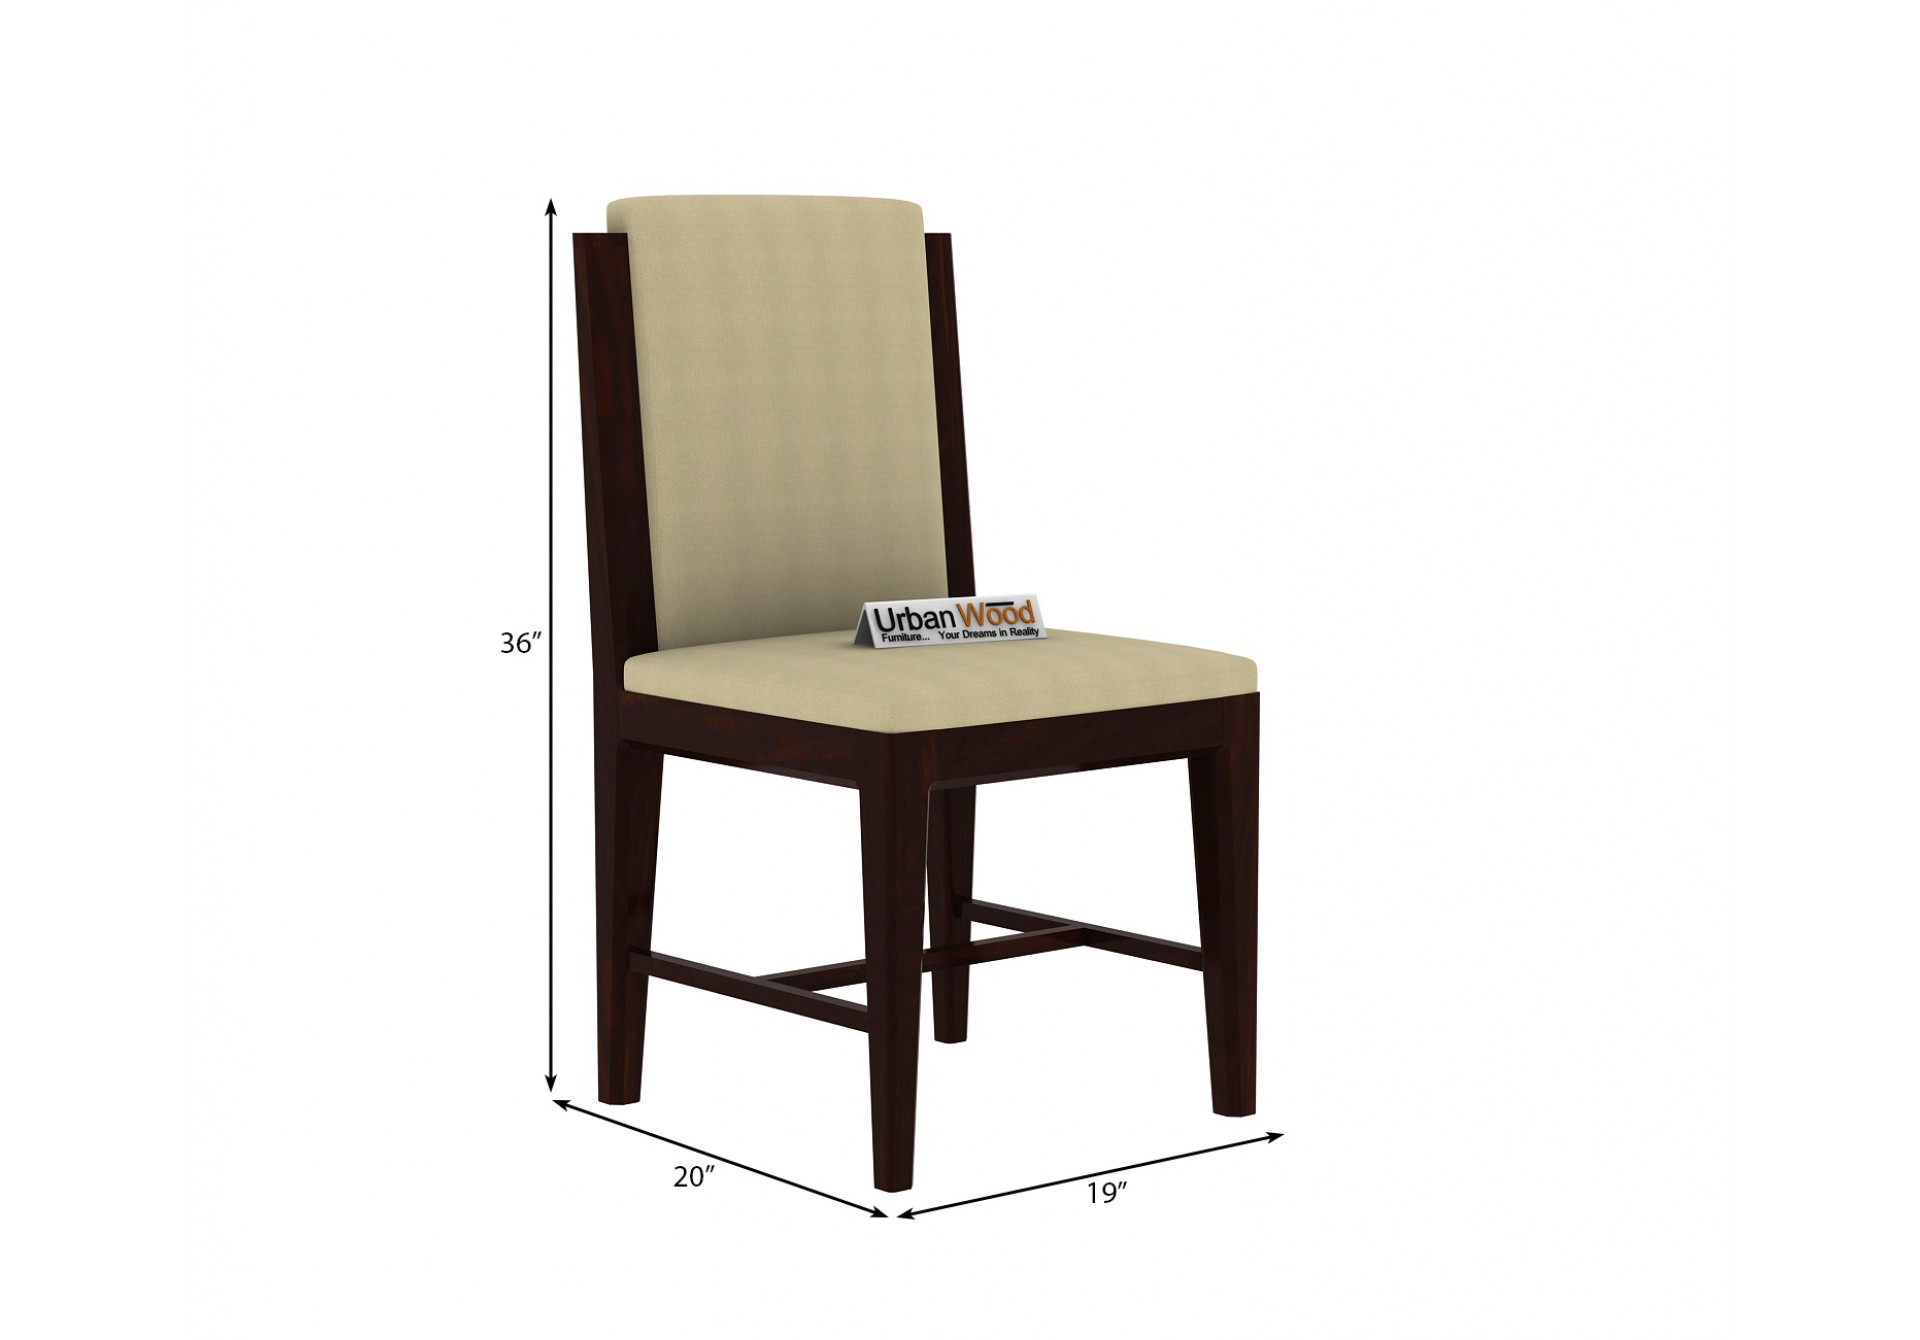 Deck Dining chair 